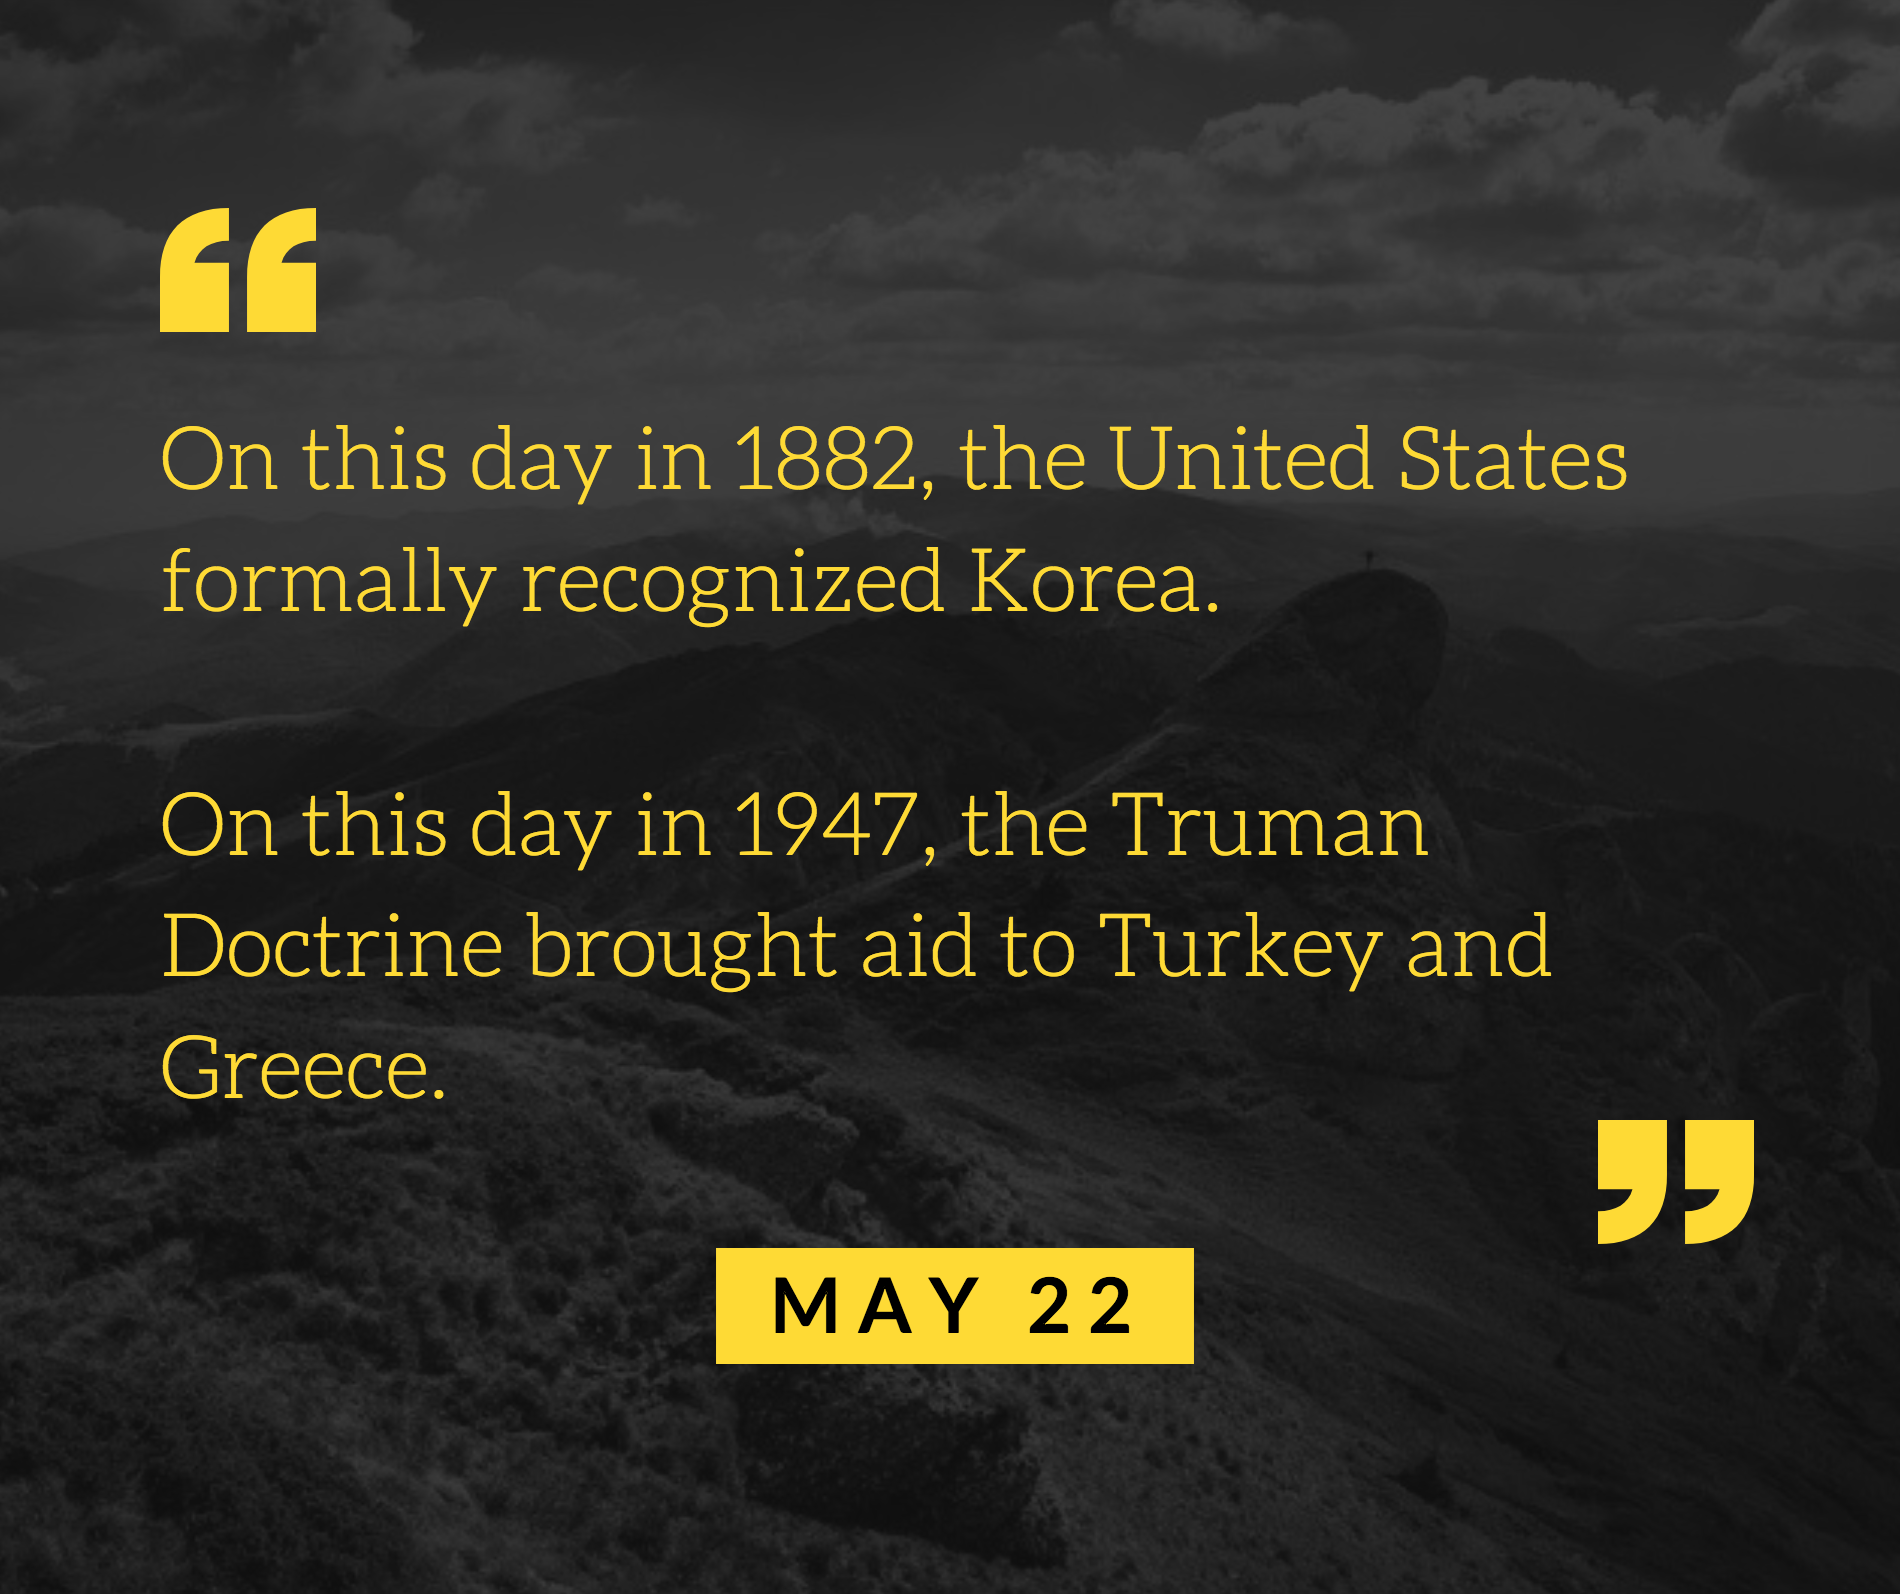 [Today in history] May 22